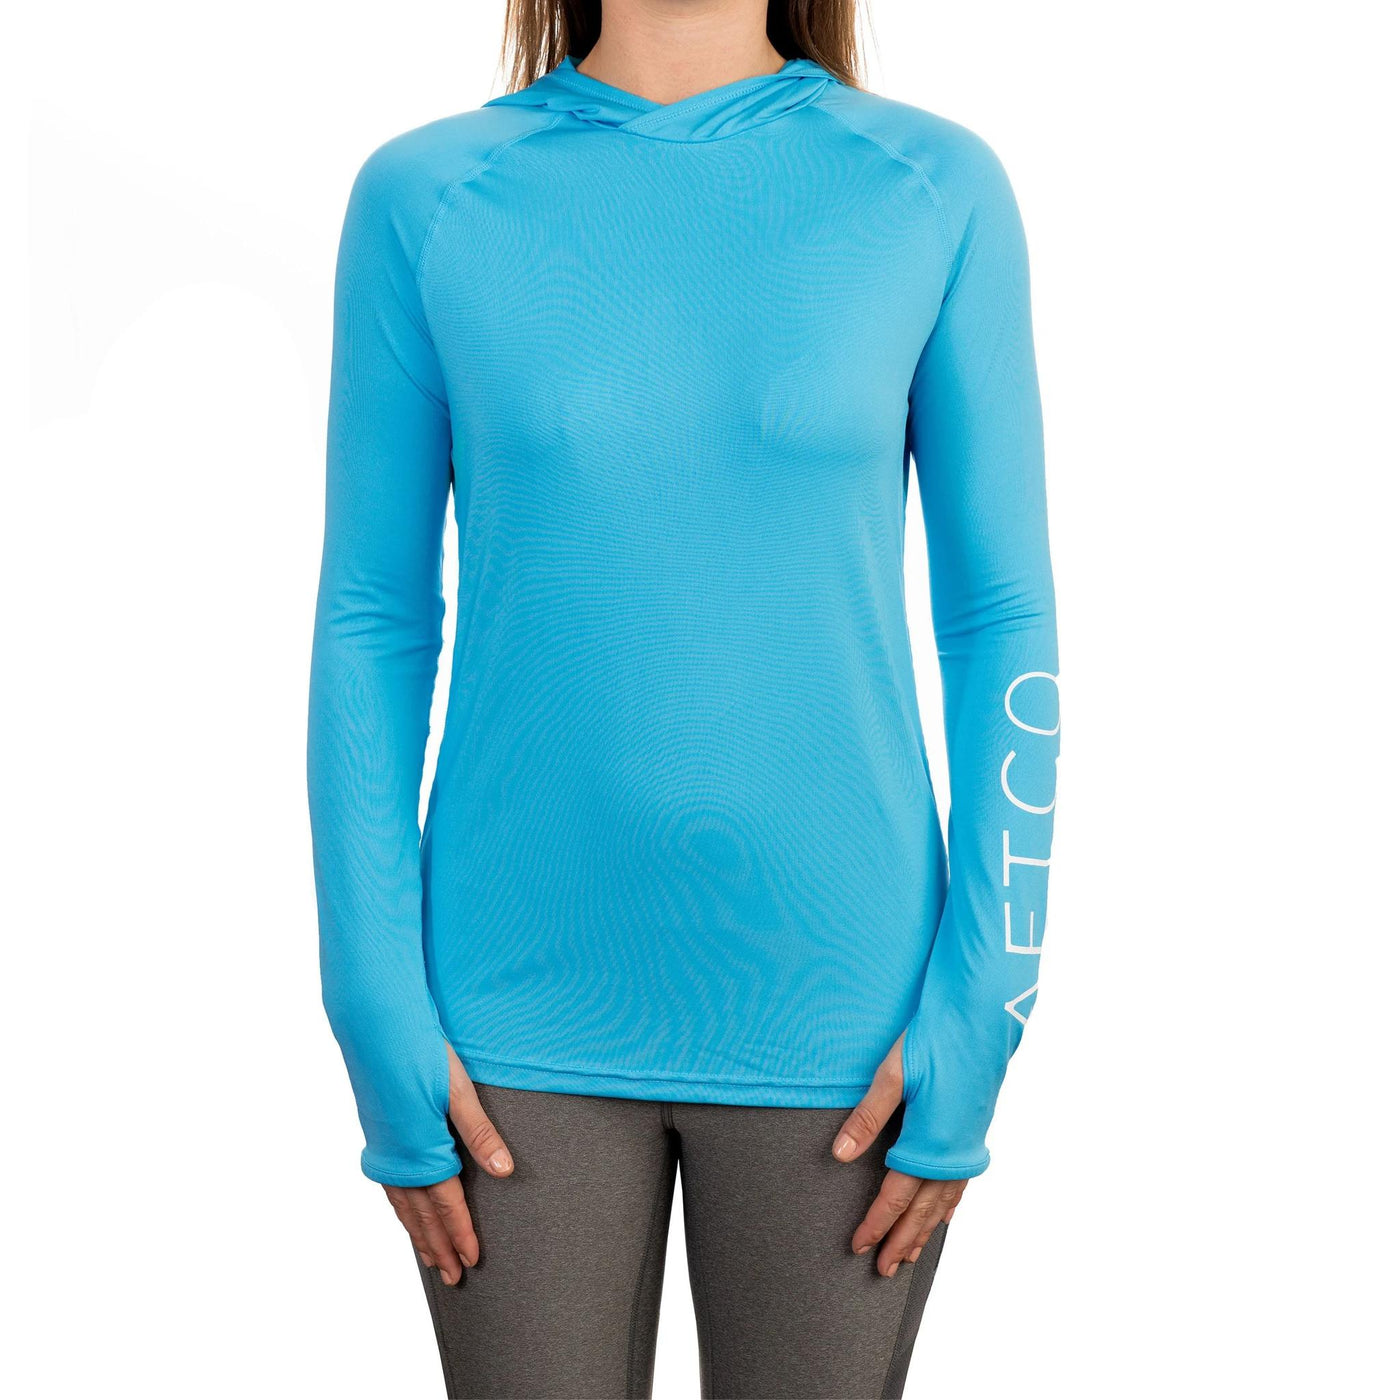 Aftco Women's Samurai Sun Protection Hoodie-WOMENS CLOTHING-Horizon Blue-XS-Kevin's Fine Outdoor Gear & Apparel